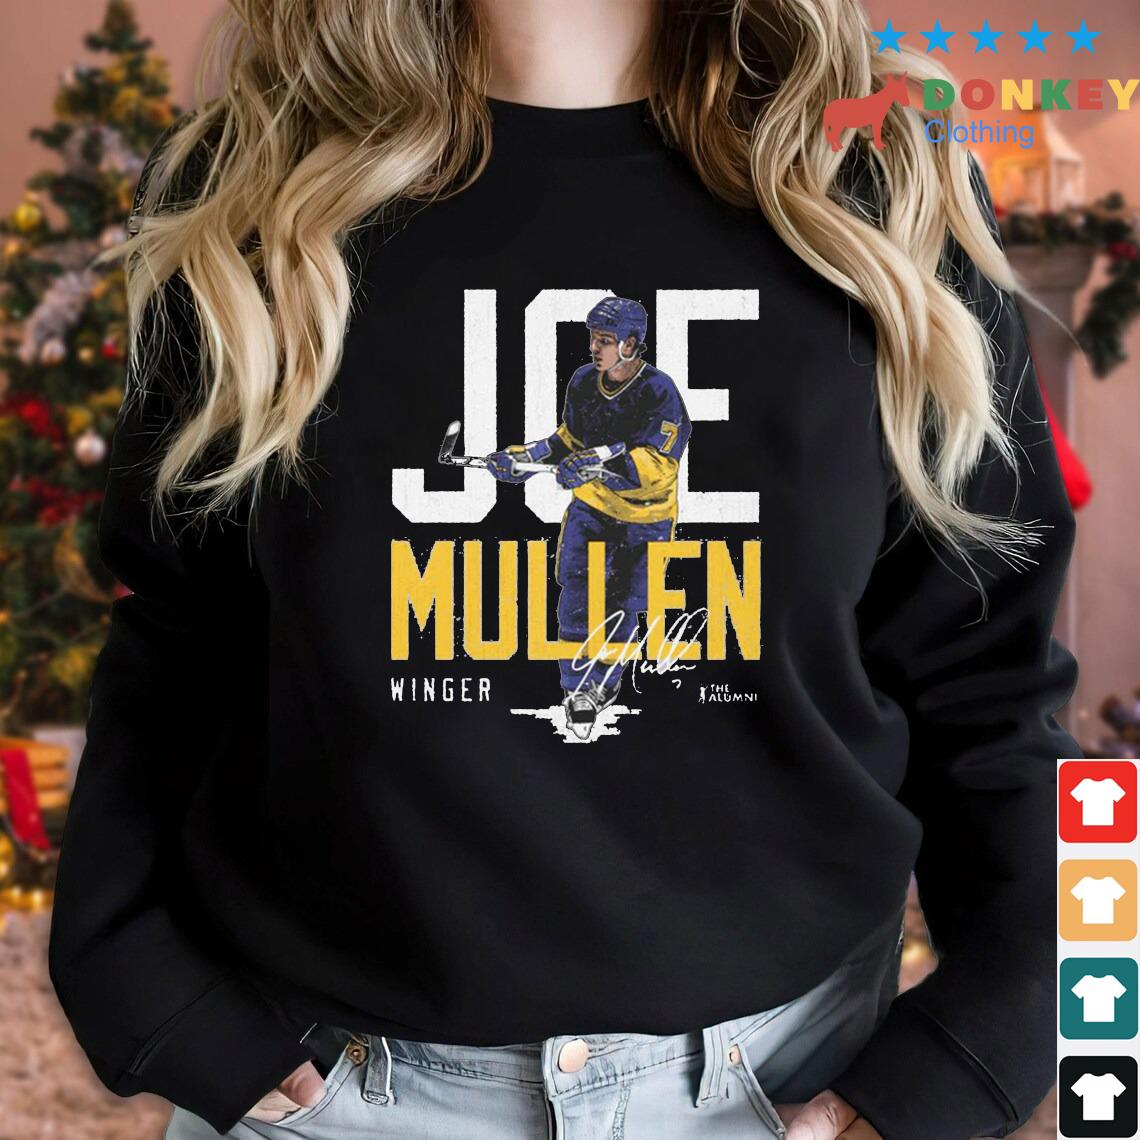 St Louis Blues Shirt Joe Mullen Winger Signature St Louis Blues Gift -  Personalized Gifts: Family, Sports, Occasions, Trending